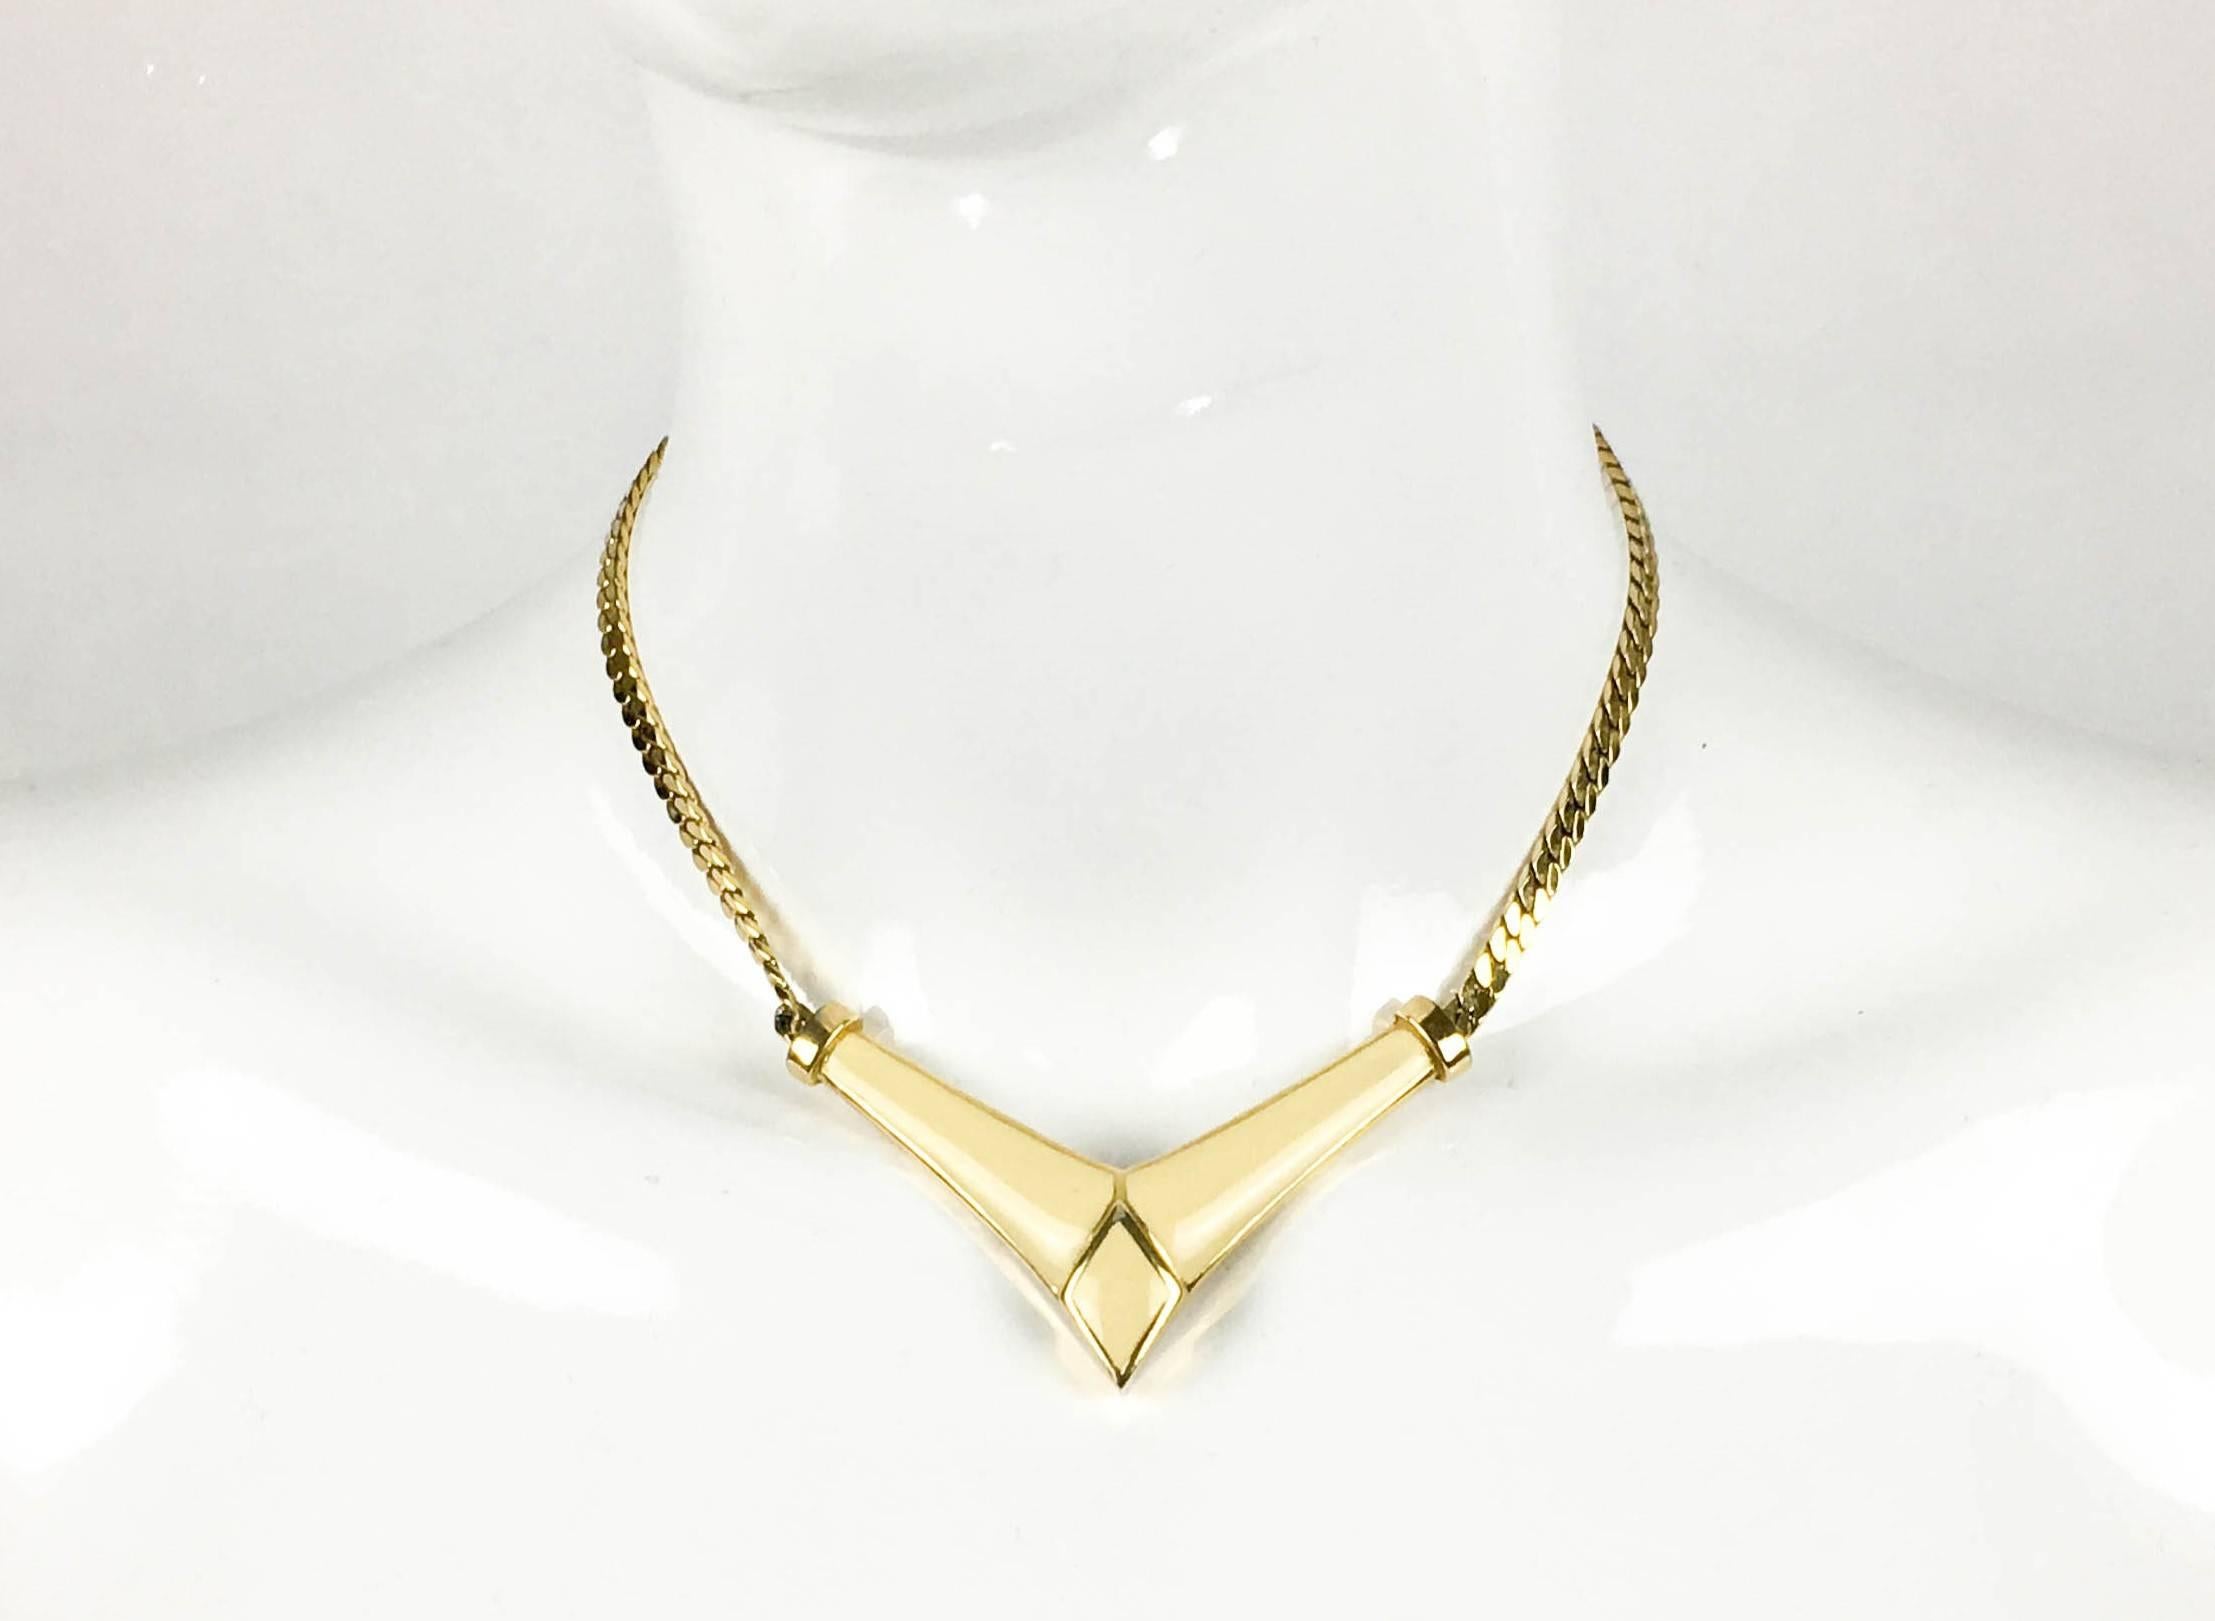 Stylish Vintage Dior Necklace. This necklace by Christian Dior was made in Germany in the 1980’s. It features a chain with a pendant style detail adorned with off-white/ivory enamelled in geometric shapes. Gold-tone hardware. Christian Dior (CD)